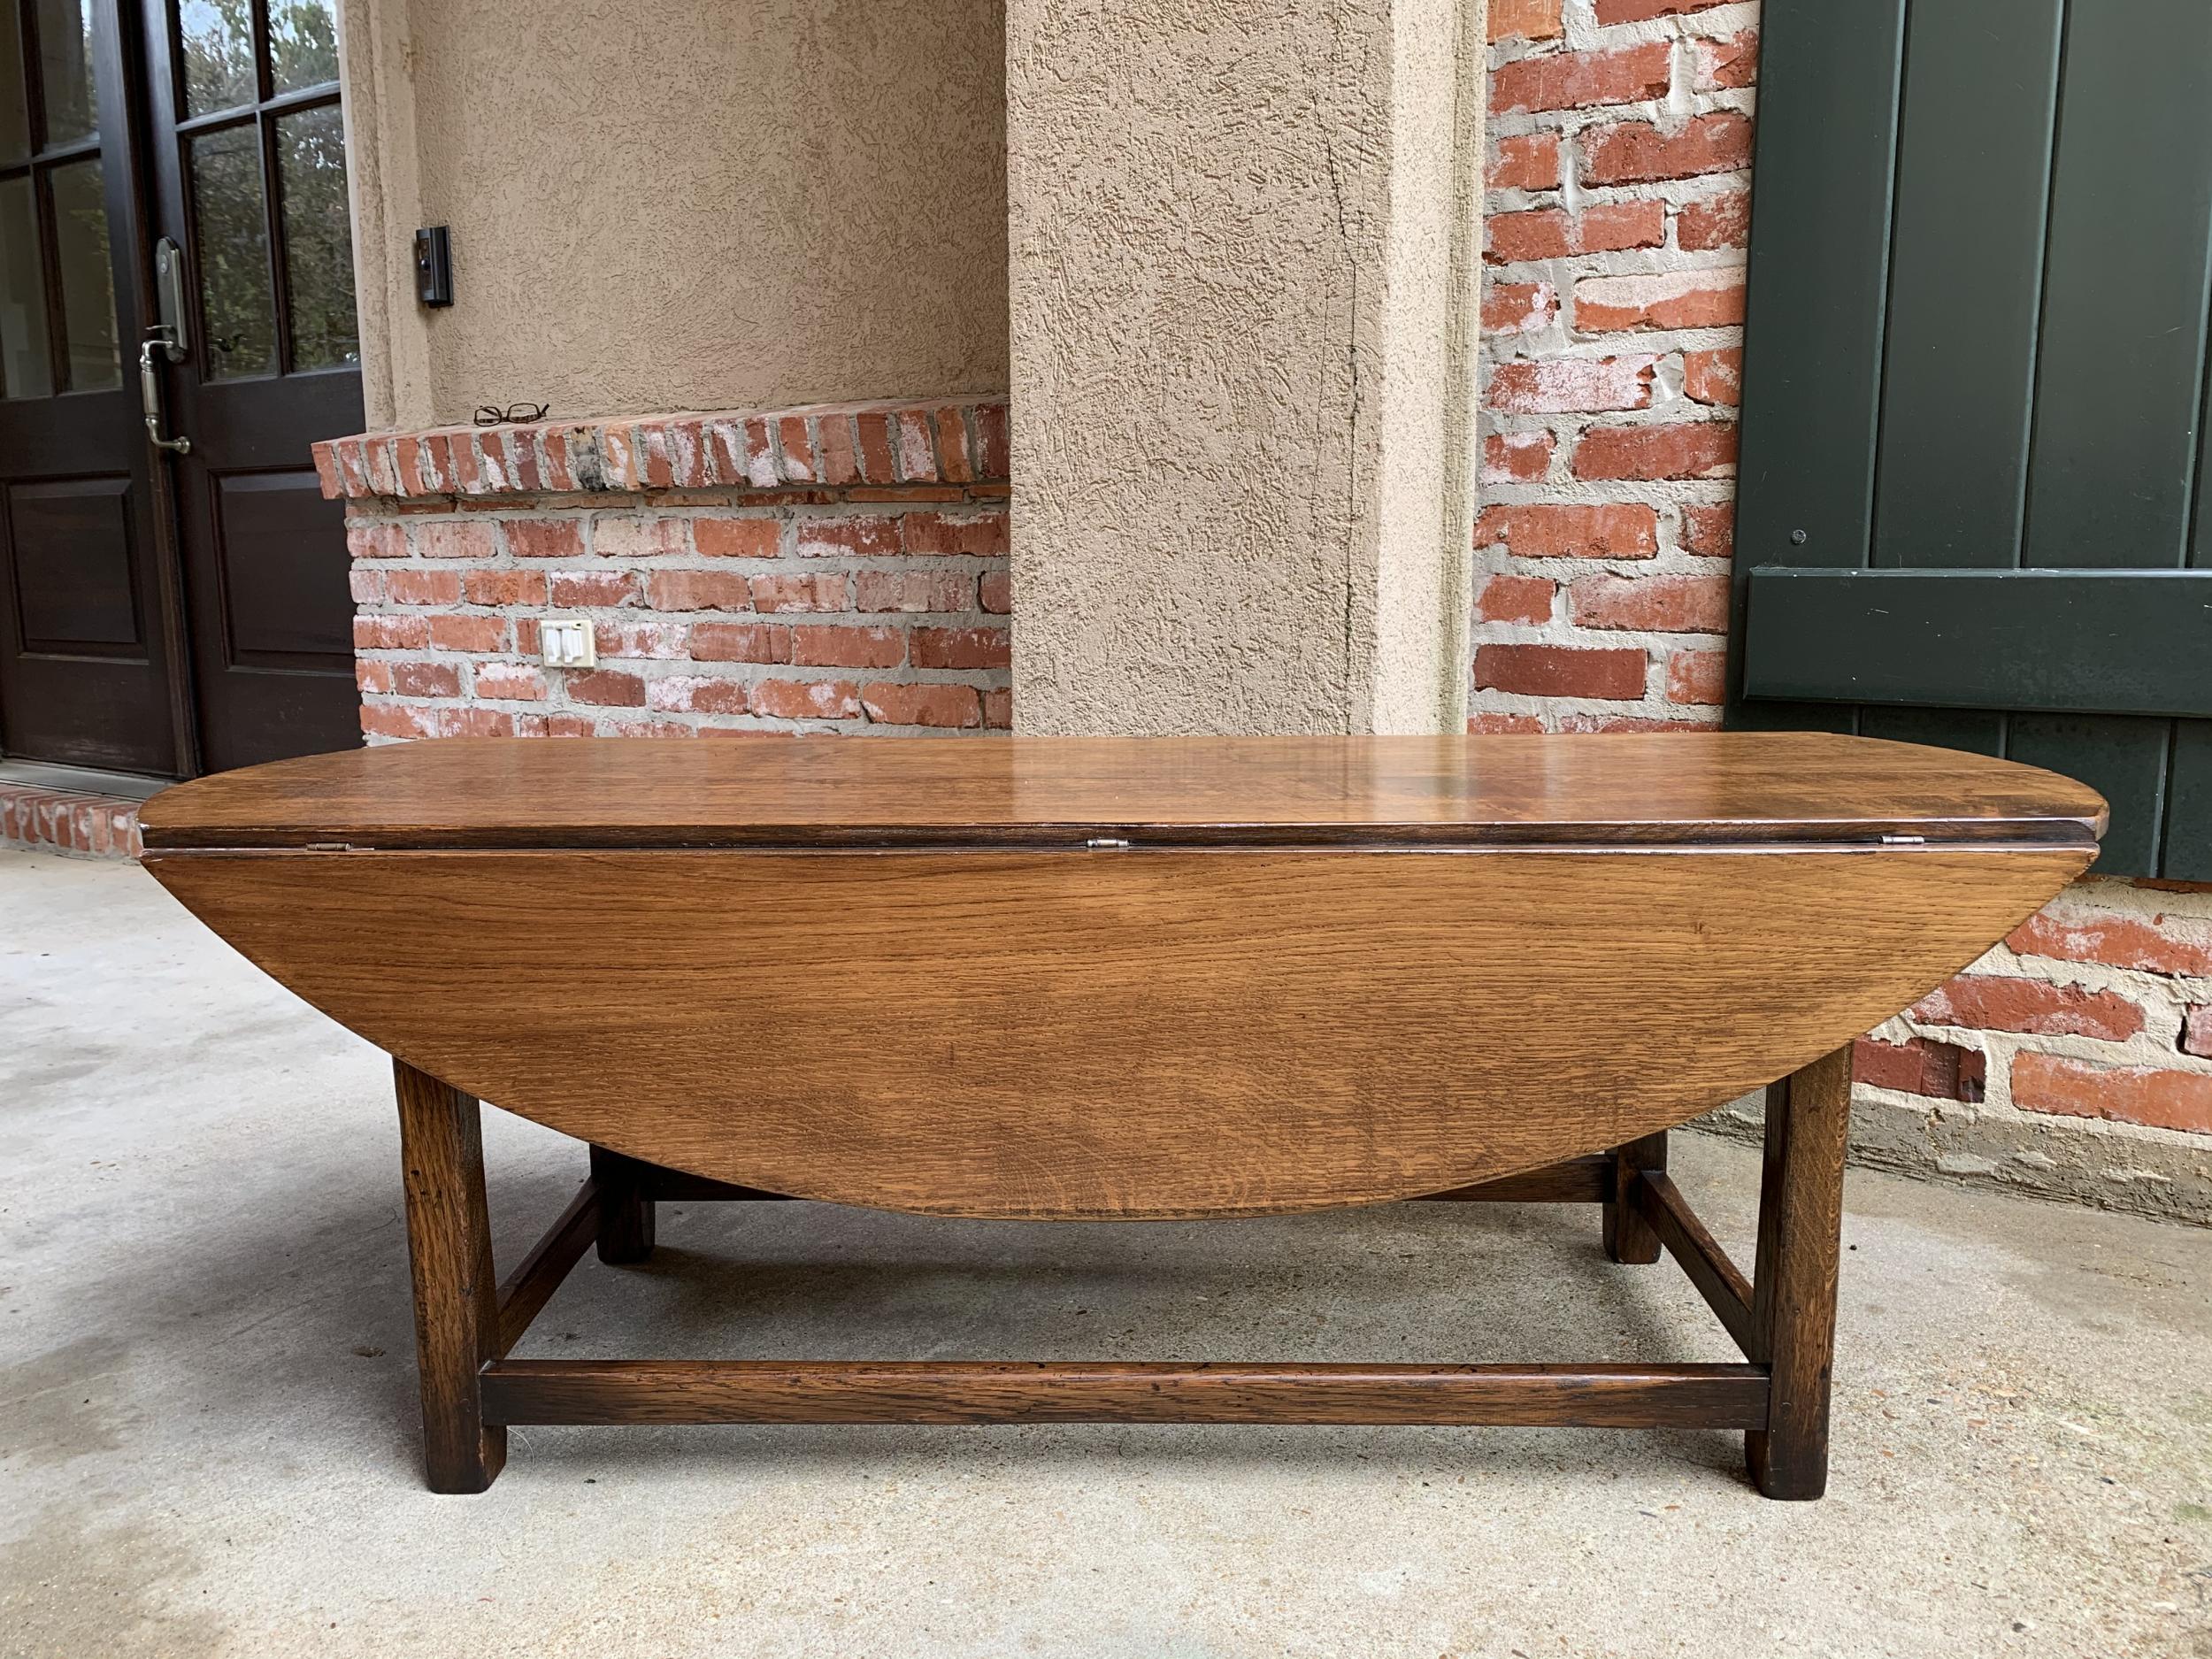 Vintage English coffee table slender drop leaf wake table oval mid century

~Direct from England~
~Lovely silhouette on this vintage English coffee table~
~Long and slender, in a traditional “wake table” design, with two drop leaves that can